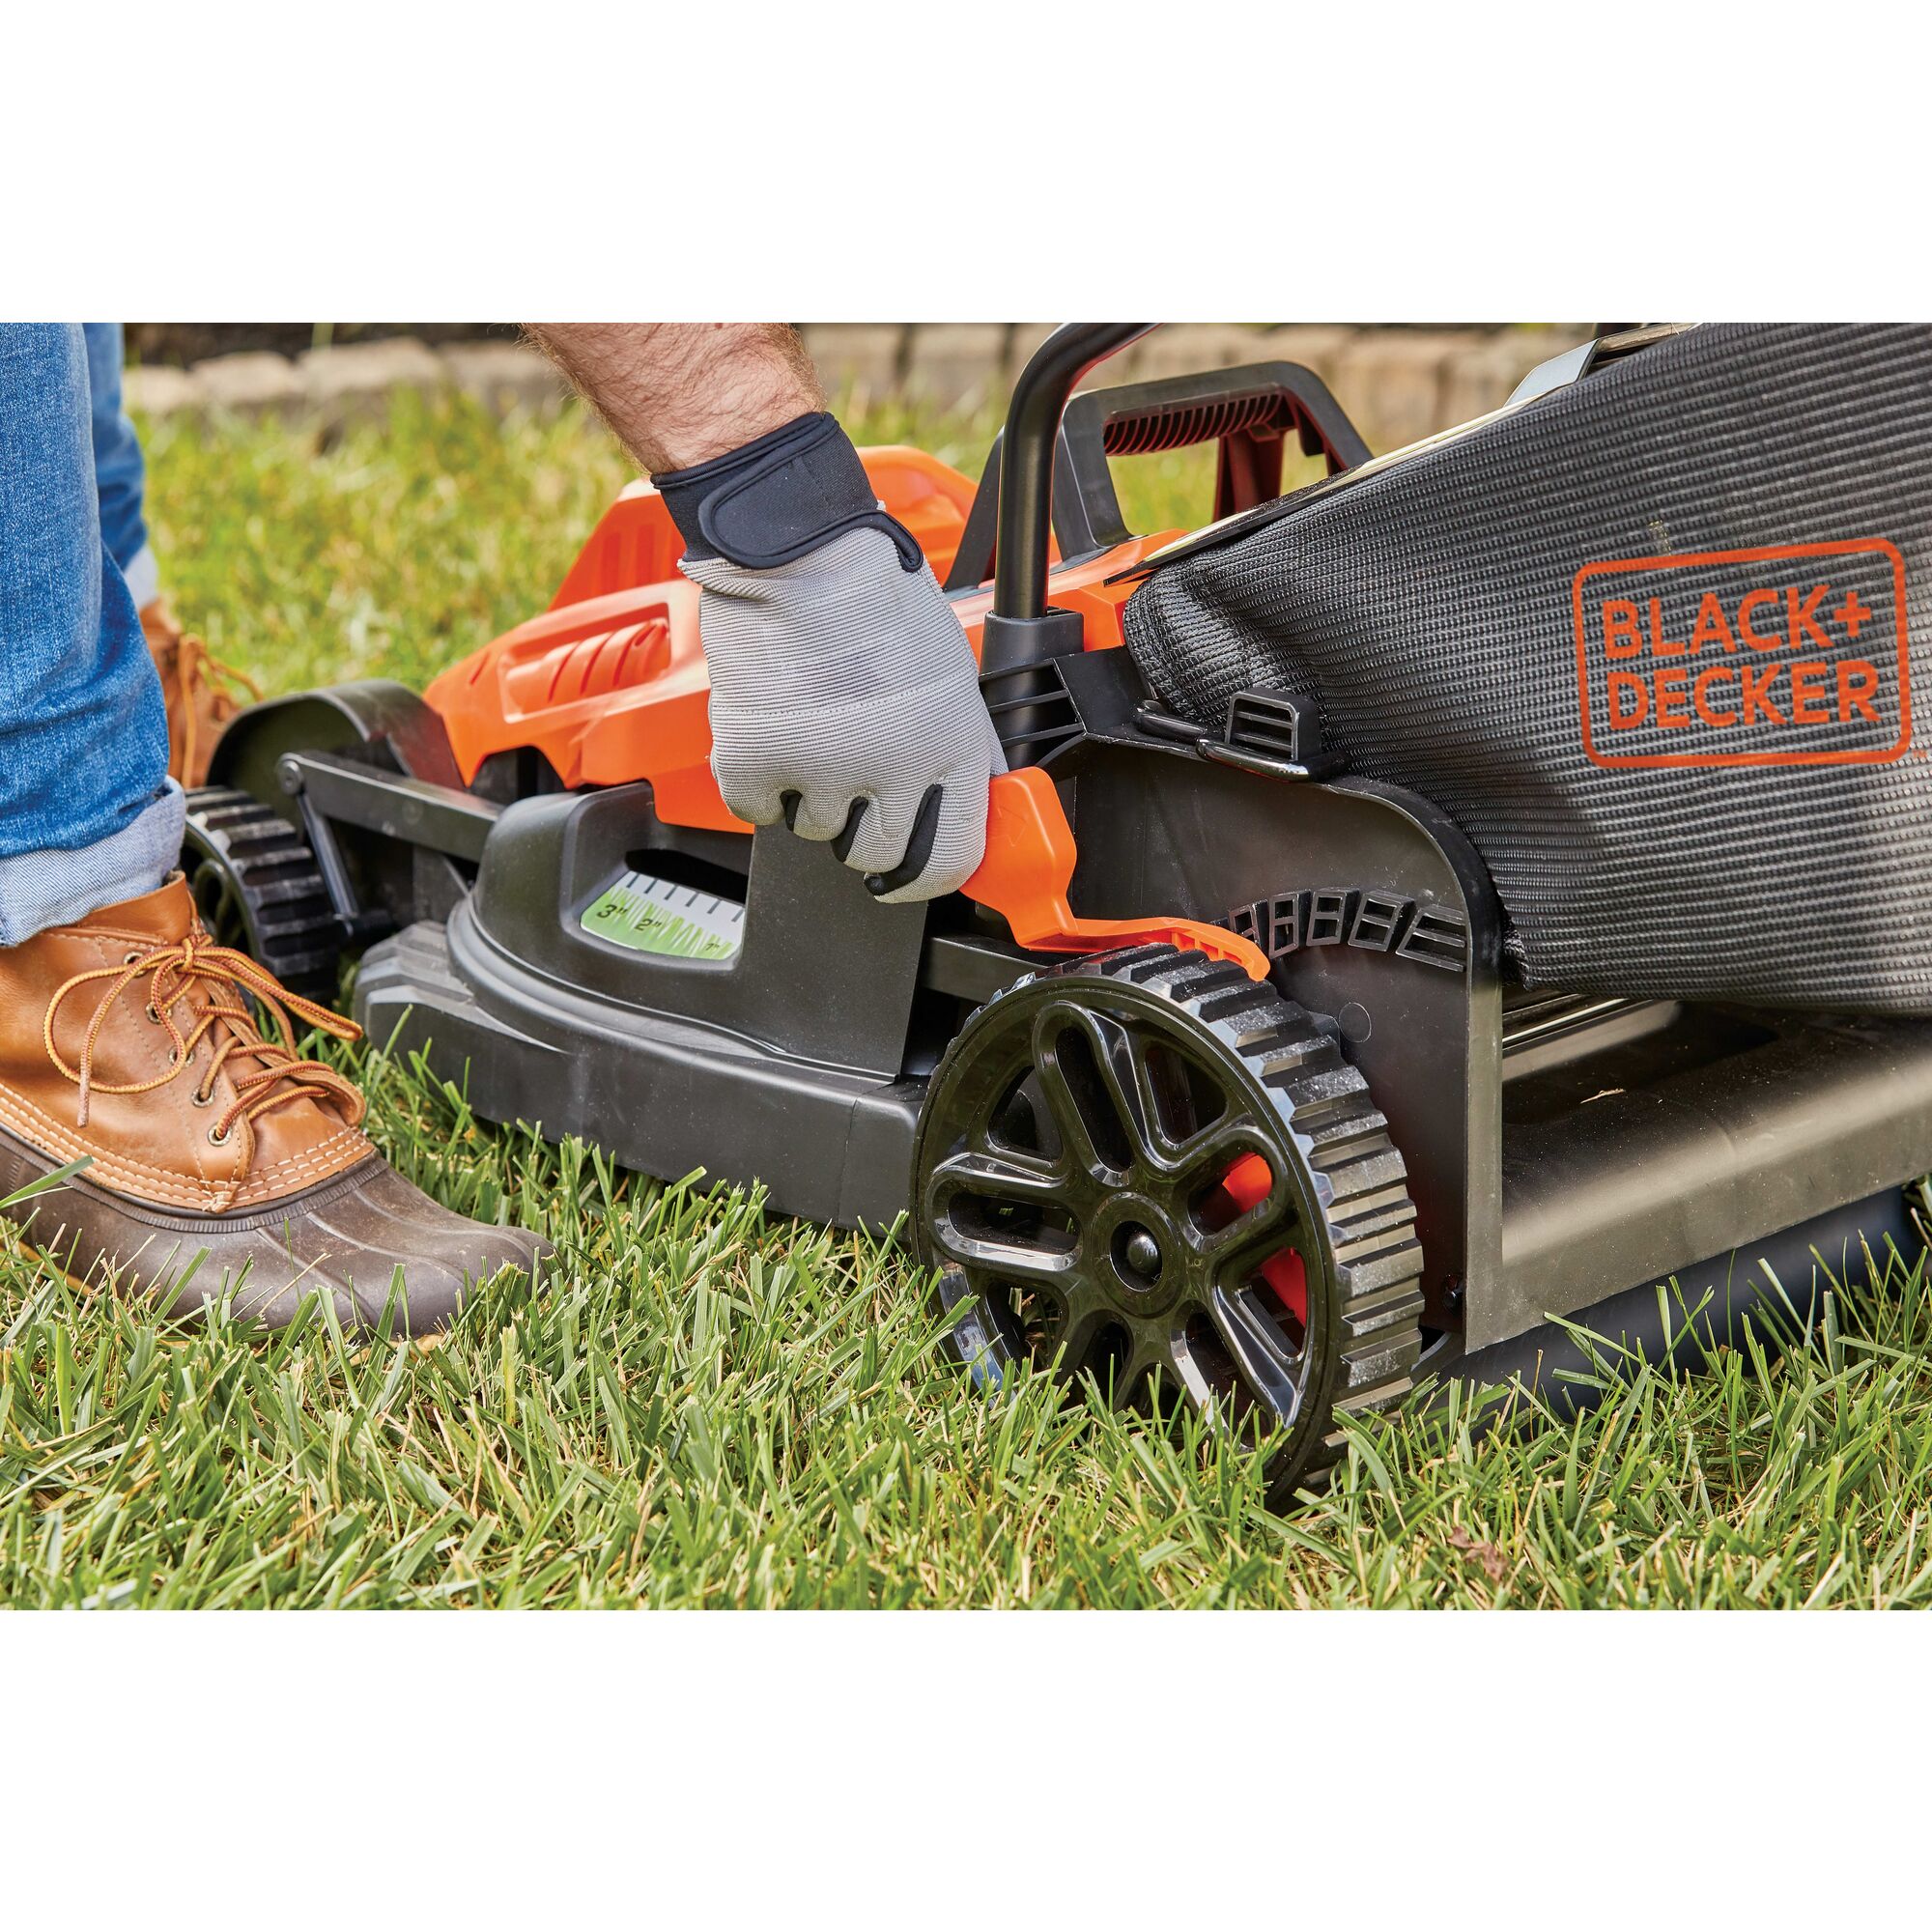 Rugged wheel treads feature of 10 Amp 15 inch electric lawn mower with comfort grip handle.